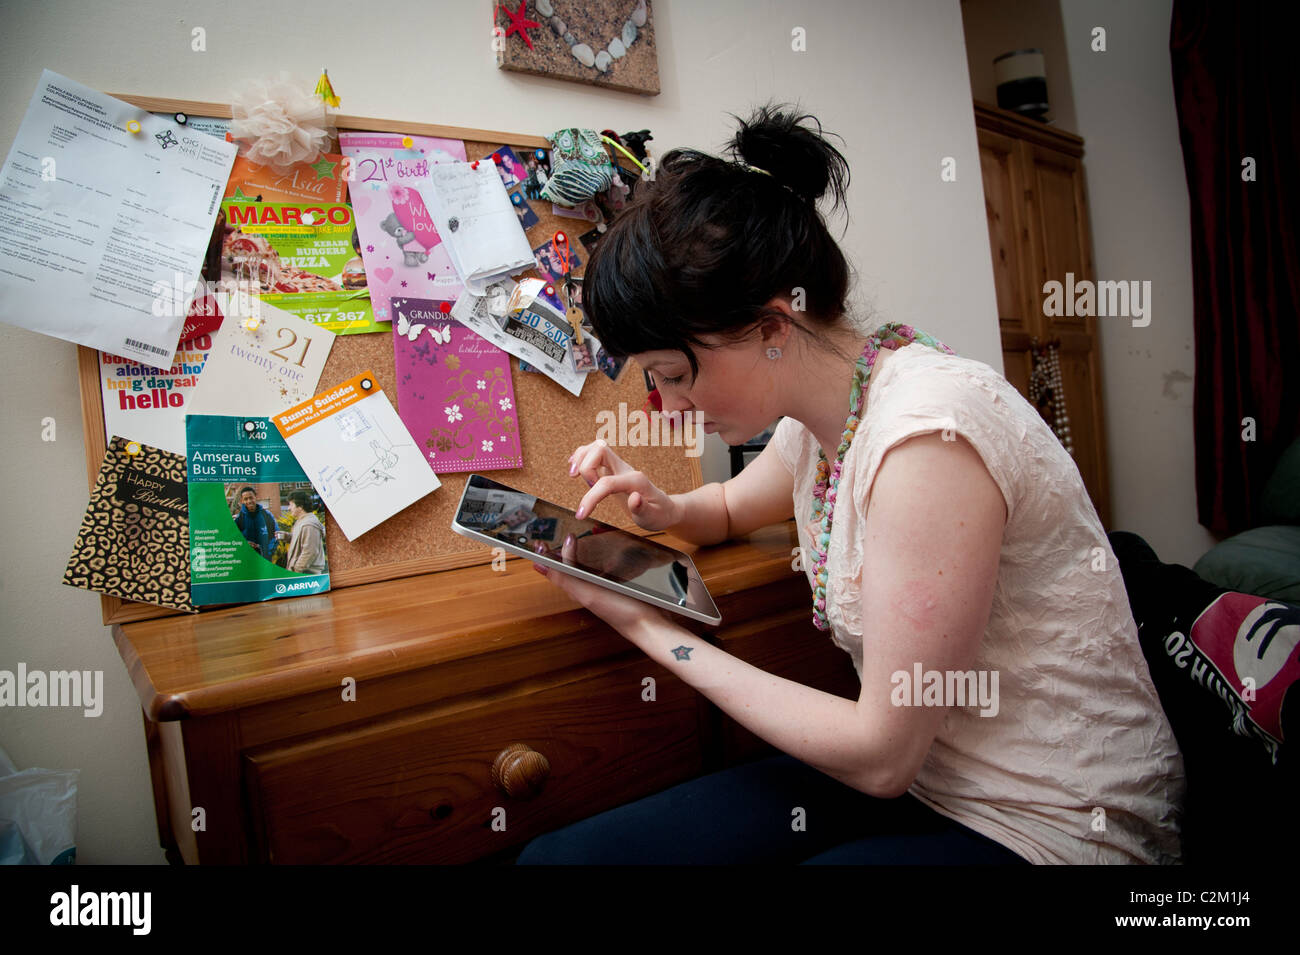 A young woman UK university student using an Apple iPad tablet computer at home Stock Photo